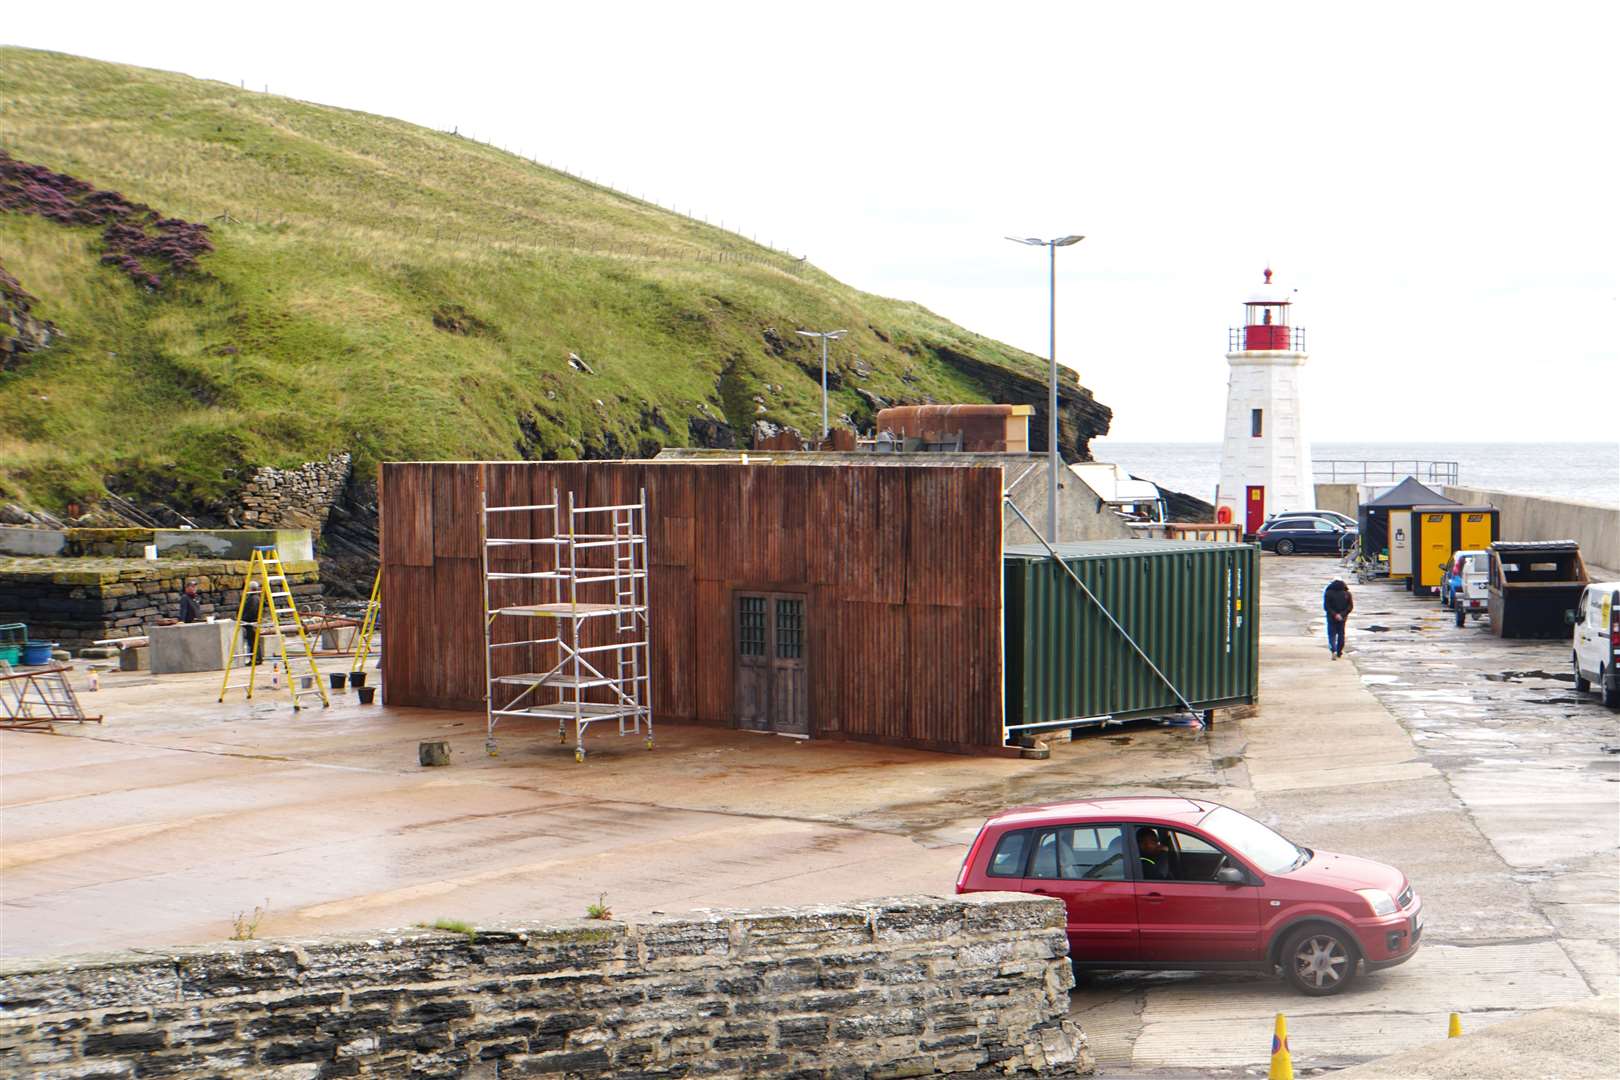 Lybster harbour is a location for Netflix series The Crown.